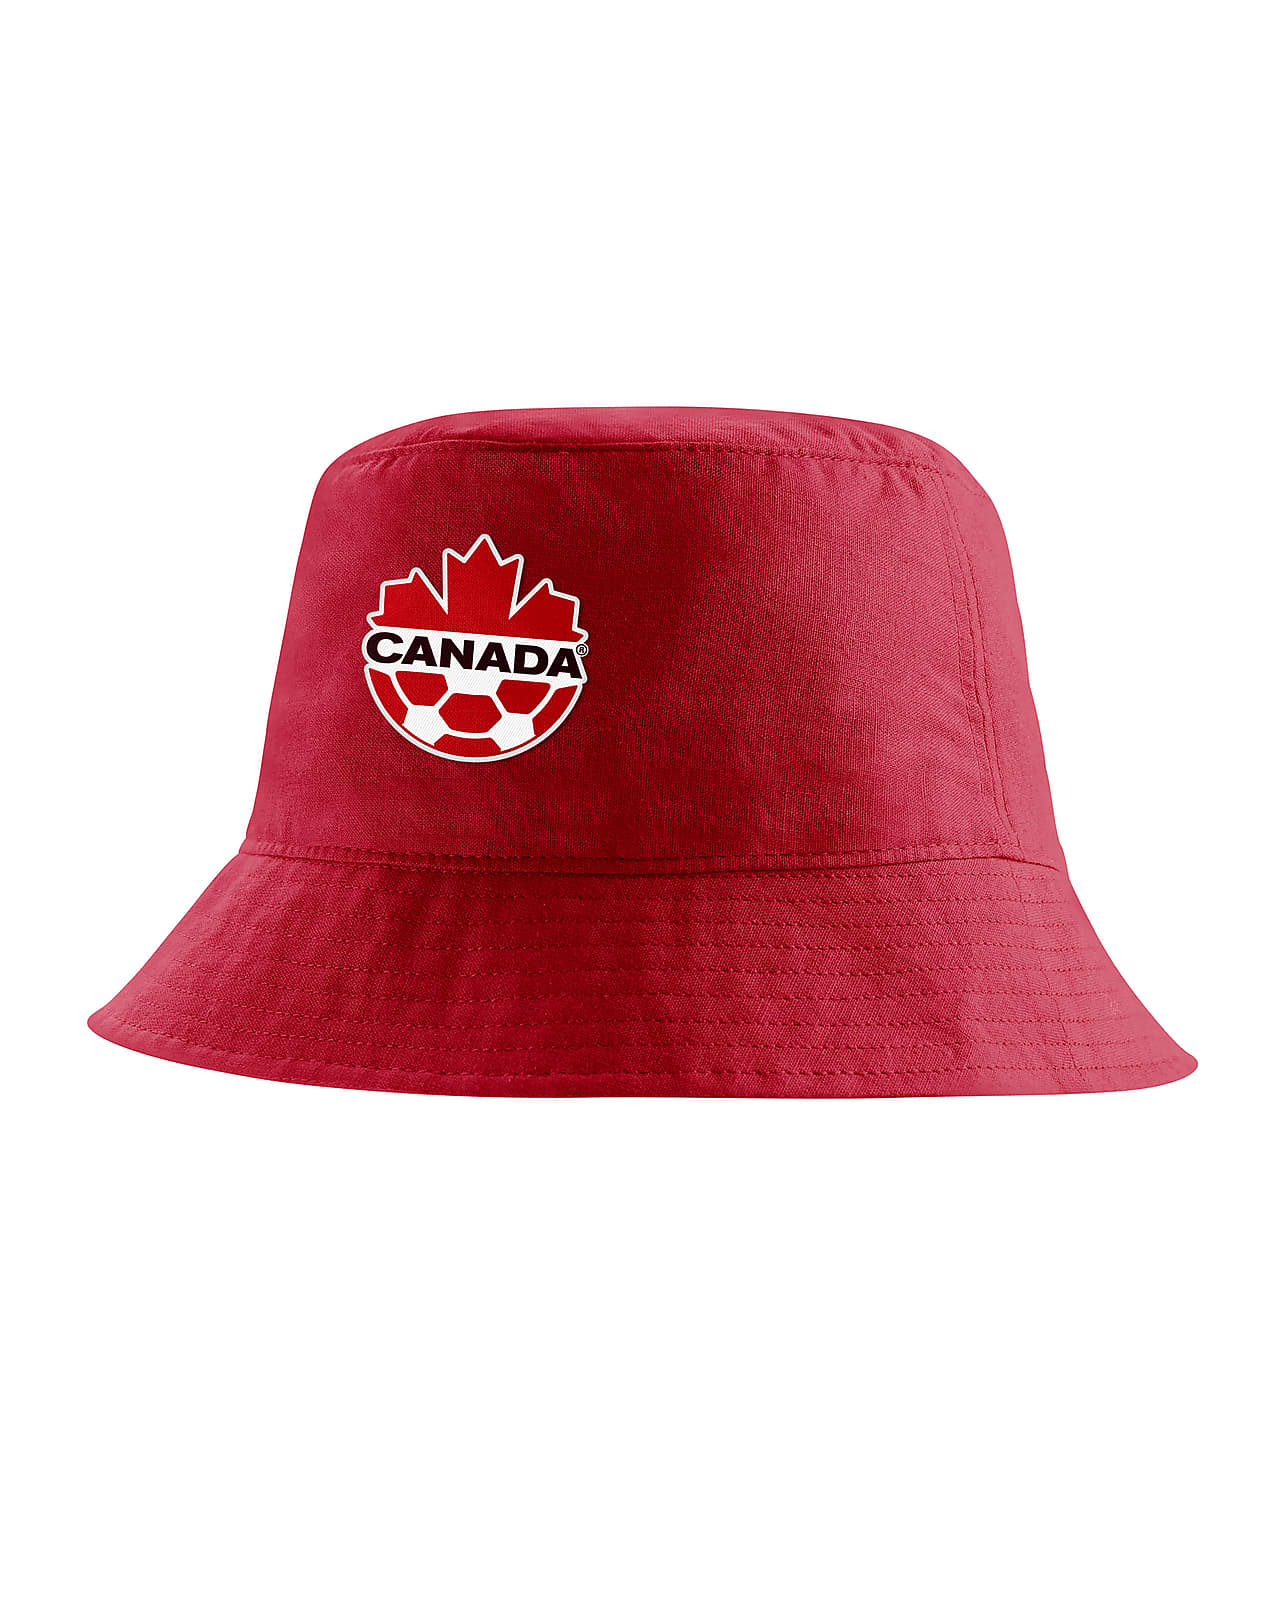 Nike Men's Red Canada Soccer Core Bucket Hat - Red